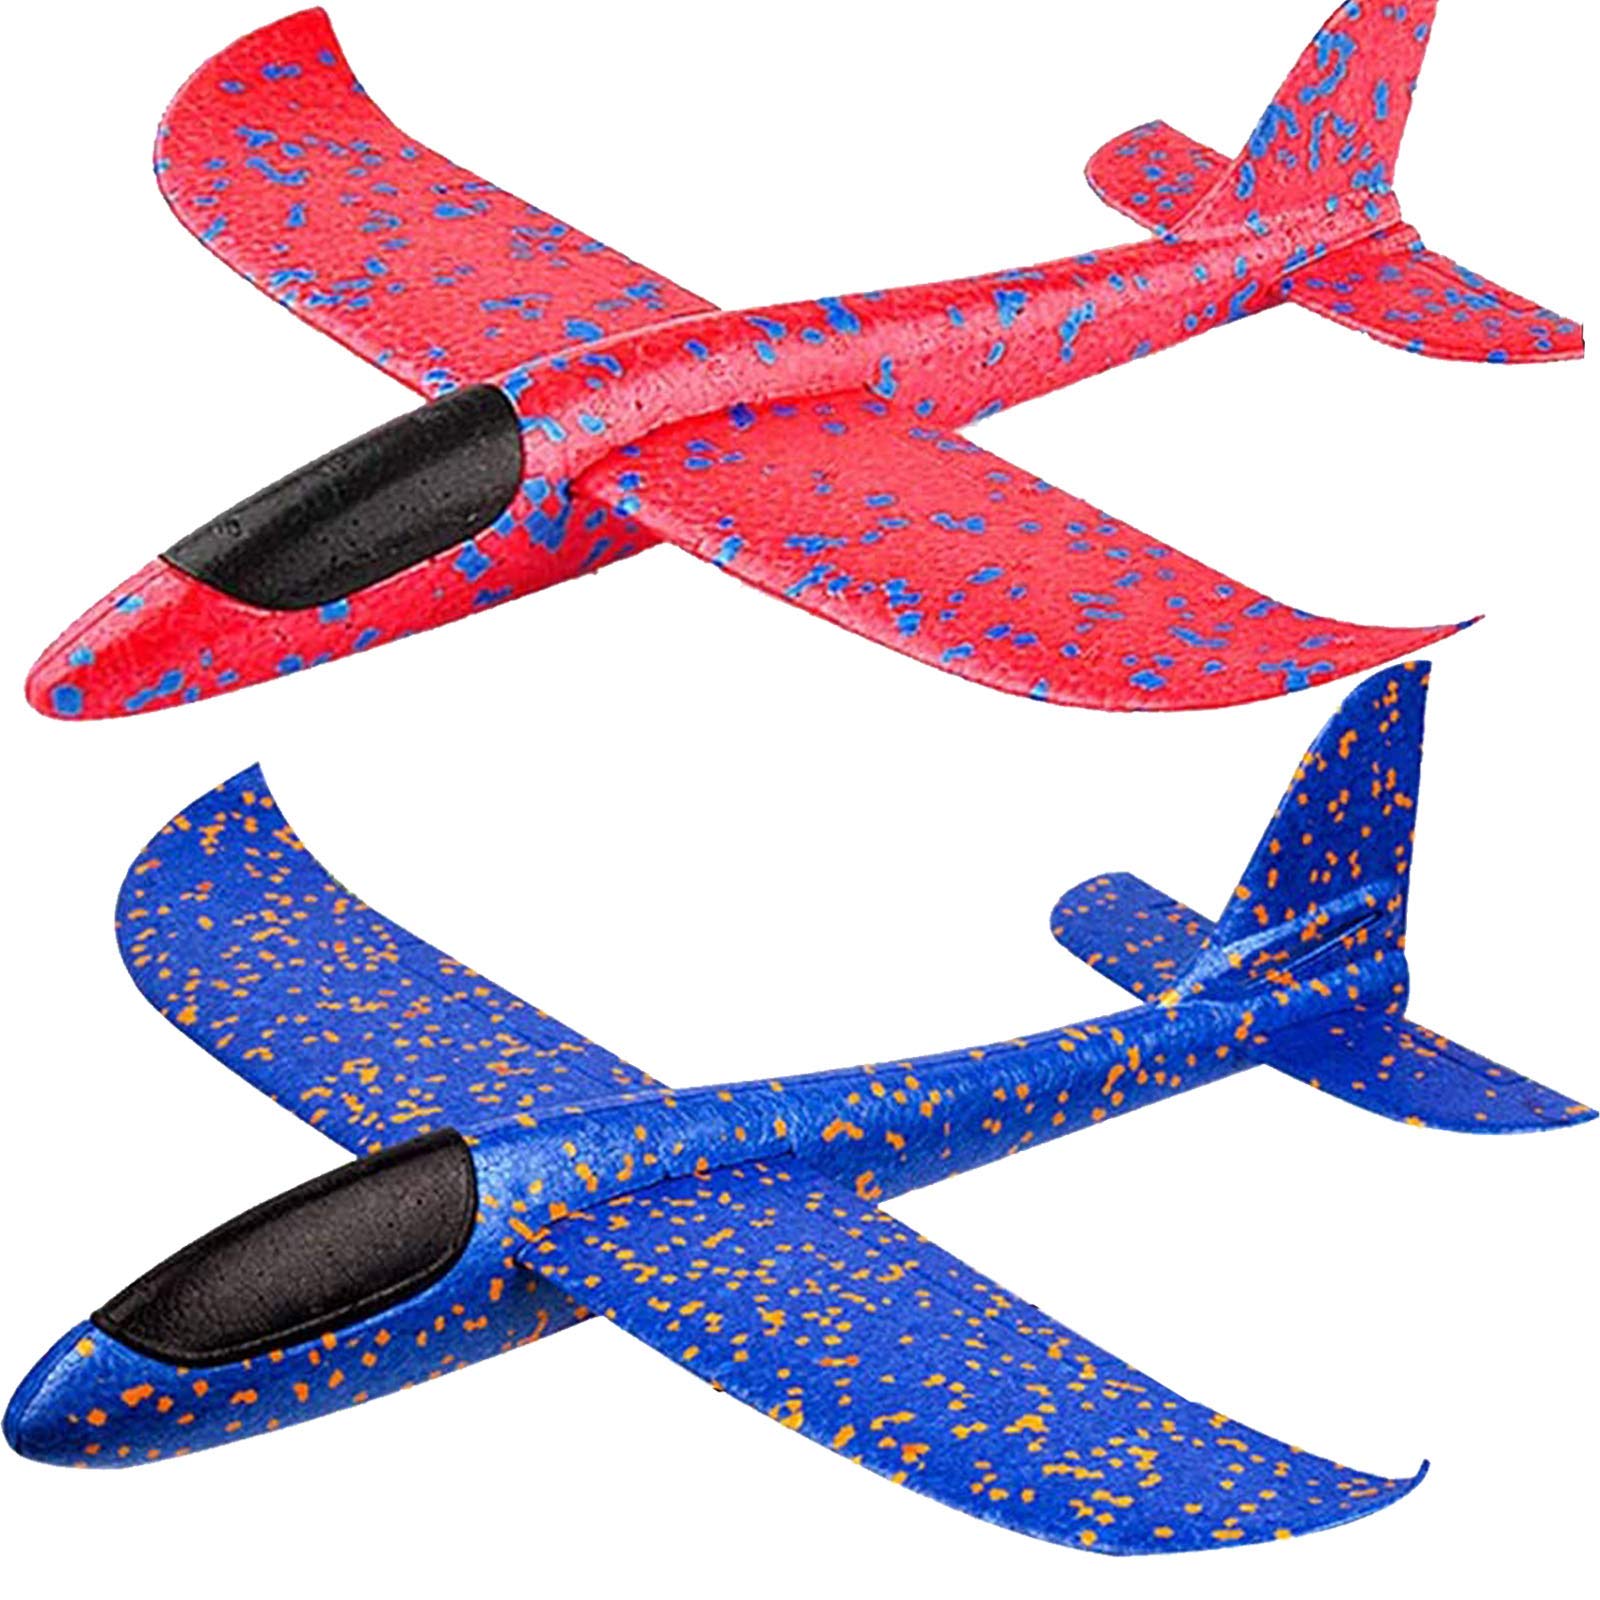 BooTaa 2 Pack Airplane Toys, 17.5" Large Throwing Foam Plane, 2 Flight Mode Glider, Flying Toy for Kids, Birthday Gifts for 3 4 5 6 7 8 9 10 11 12 Year Old Boys Girls, Outdoor Sport Toys Party Favors